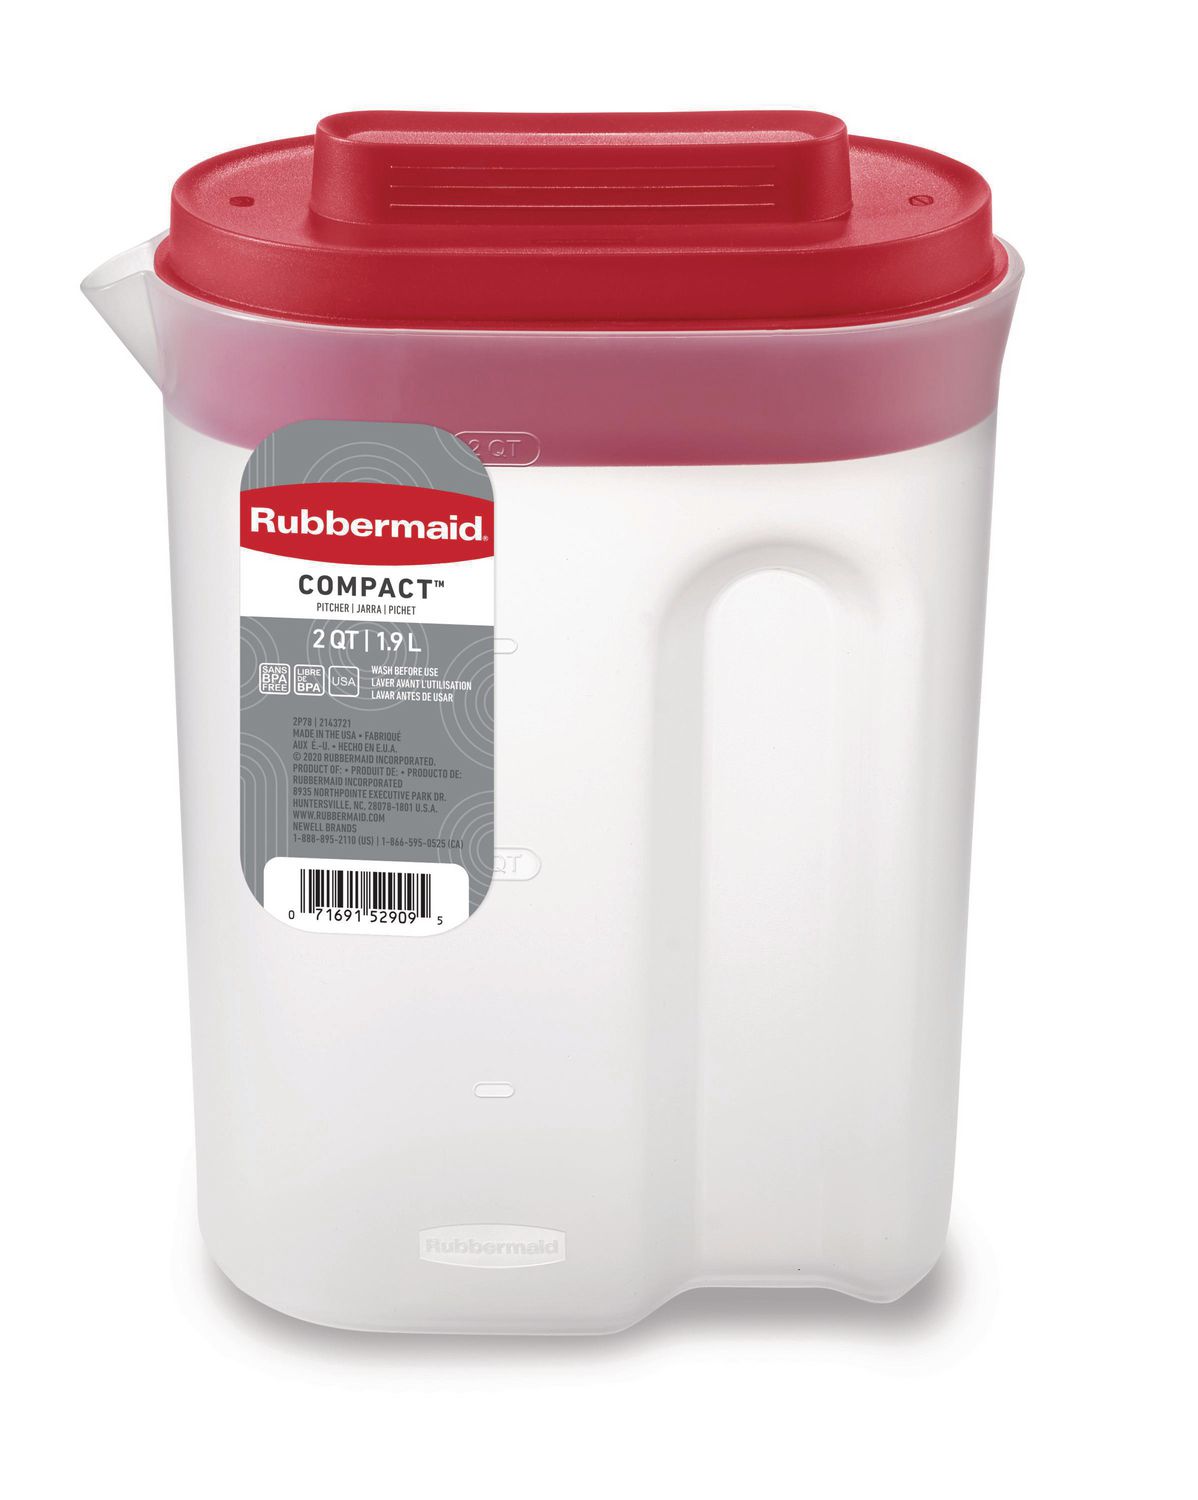 Rubbermaid Compact Pitcher, Plastic Pitcher with